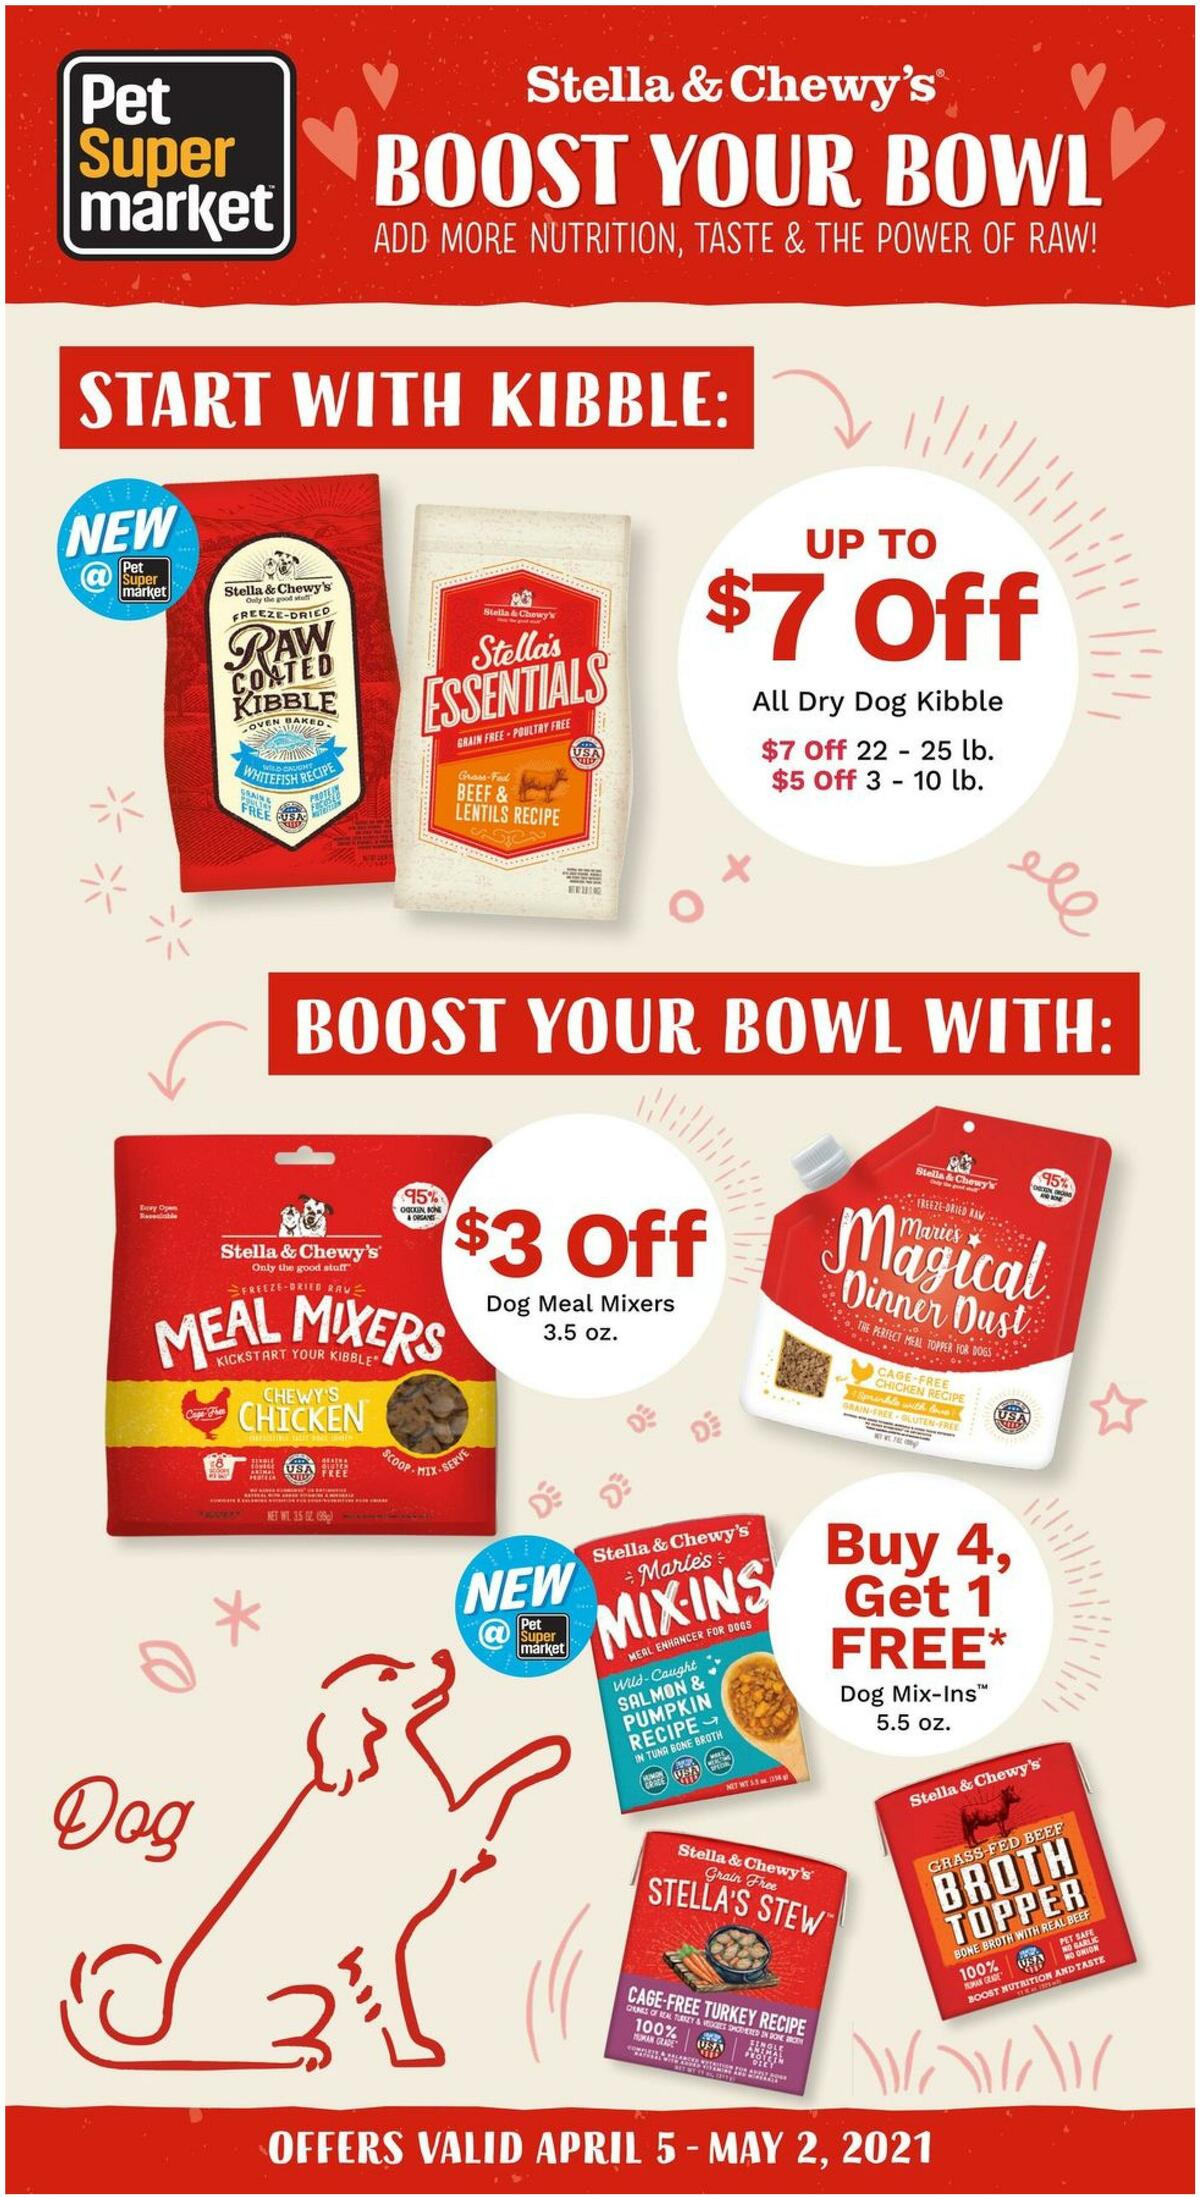 Pet Supermarket Bowl with Stella & Chewy Weekly Ad from April 5